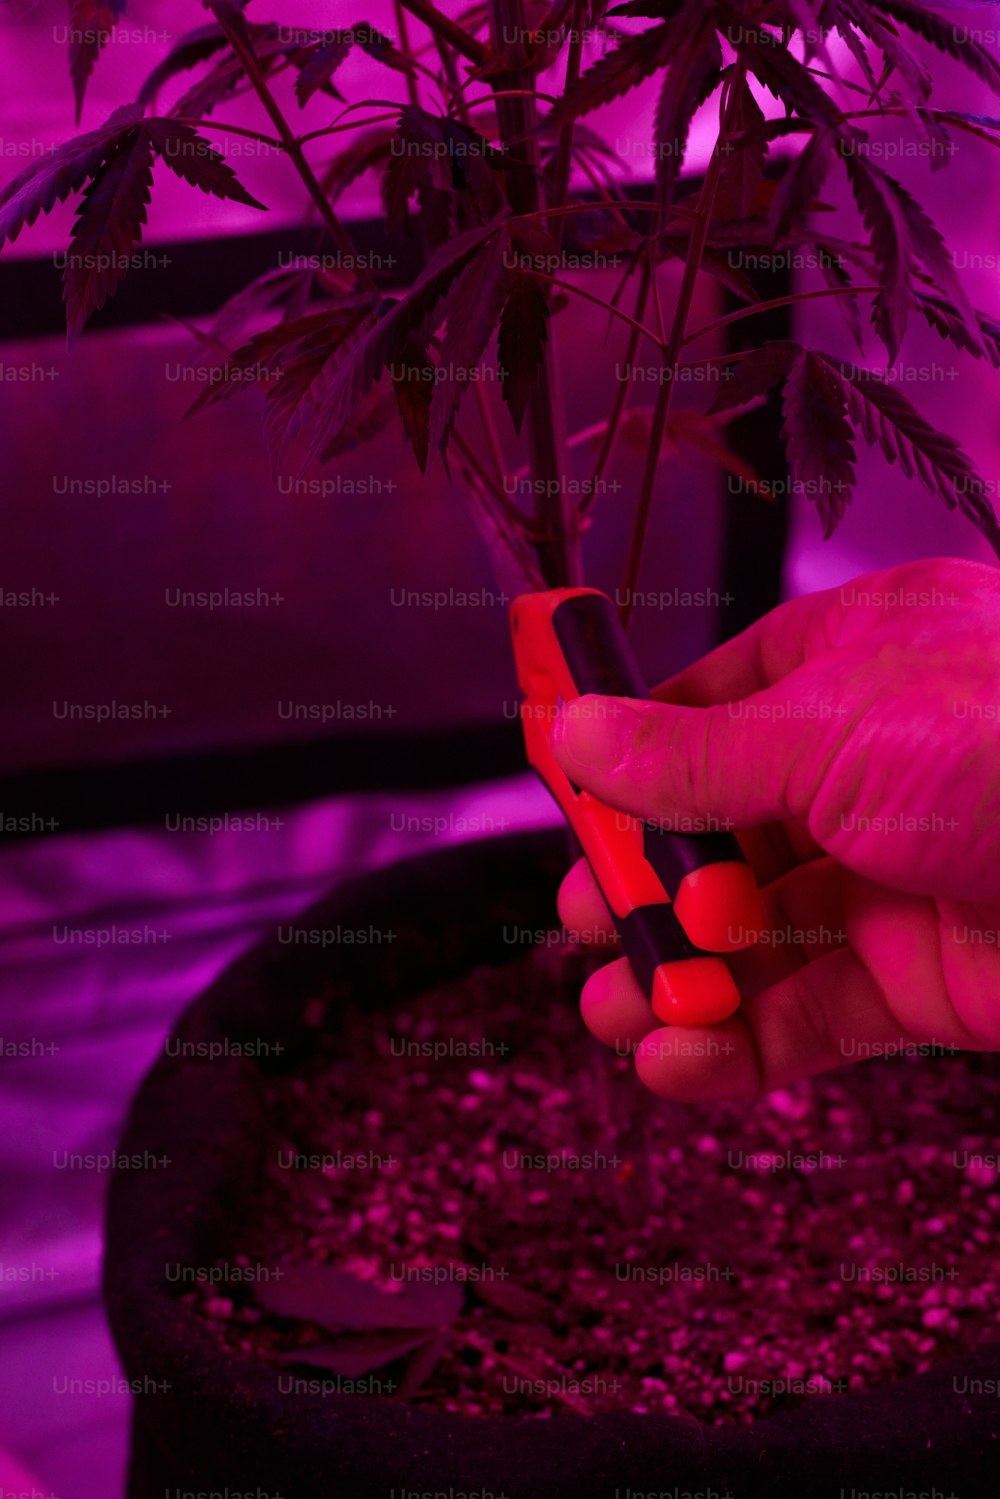 a person holding a cell phone next to a potted plant